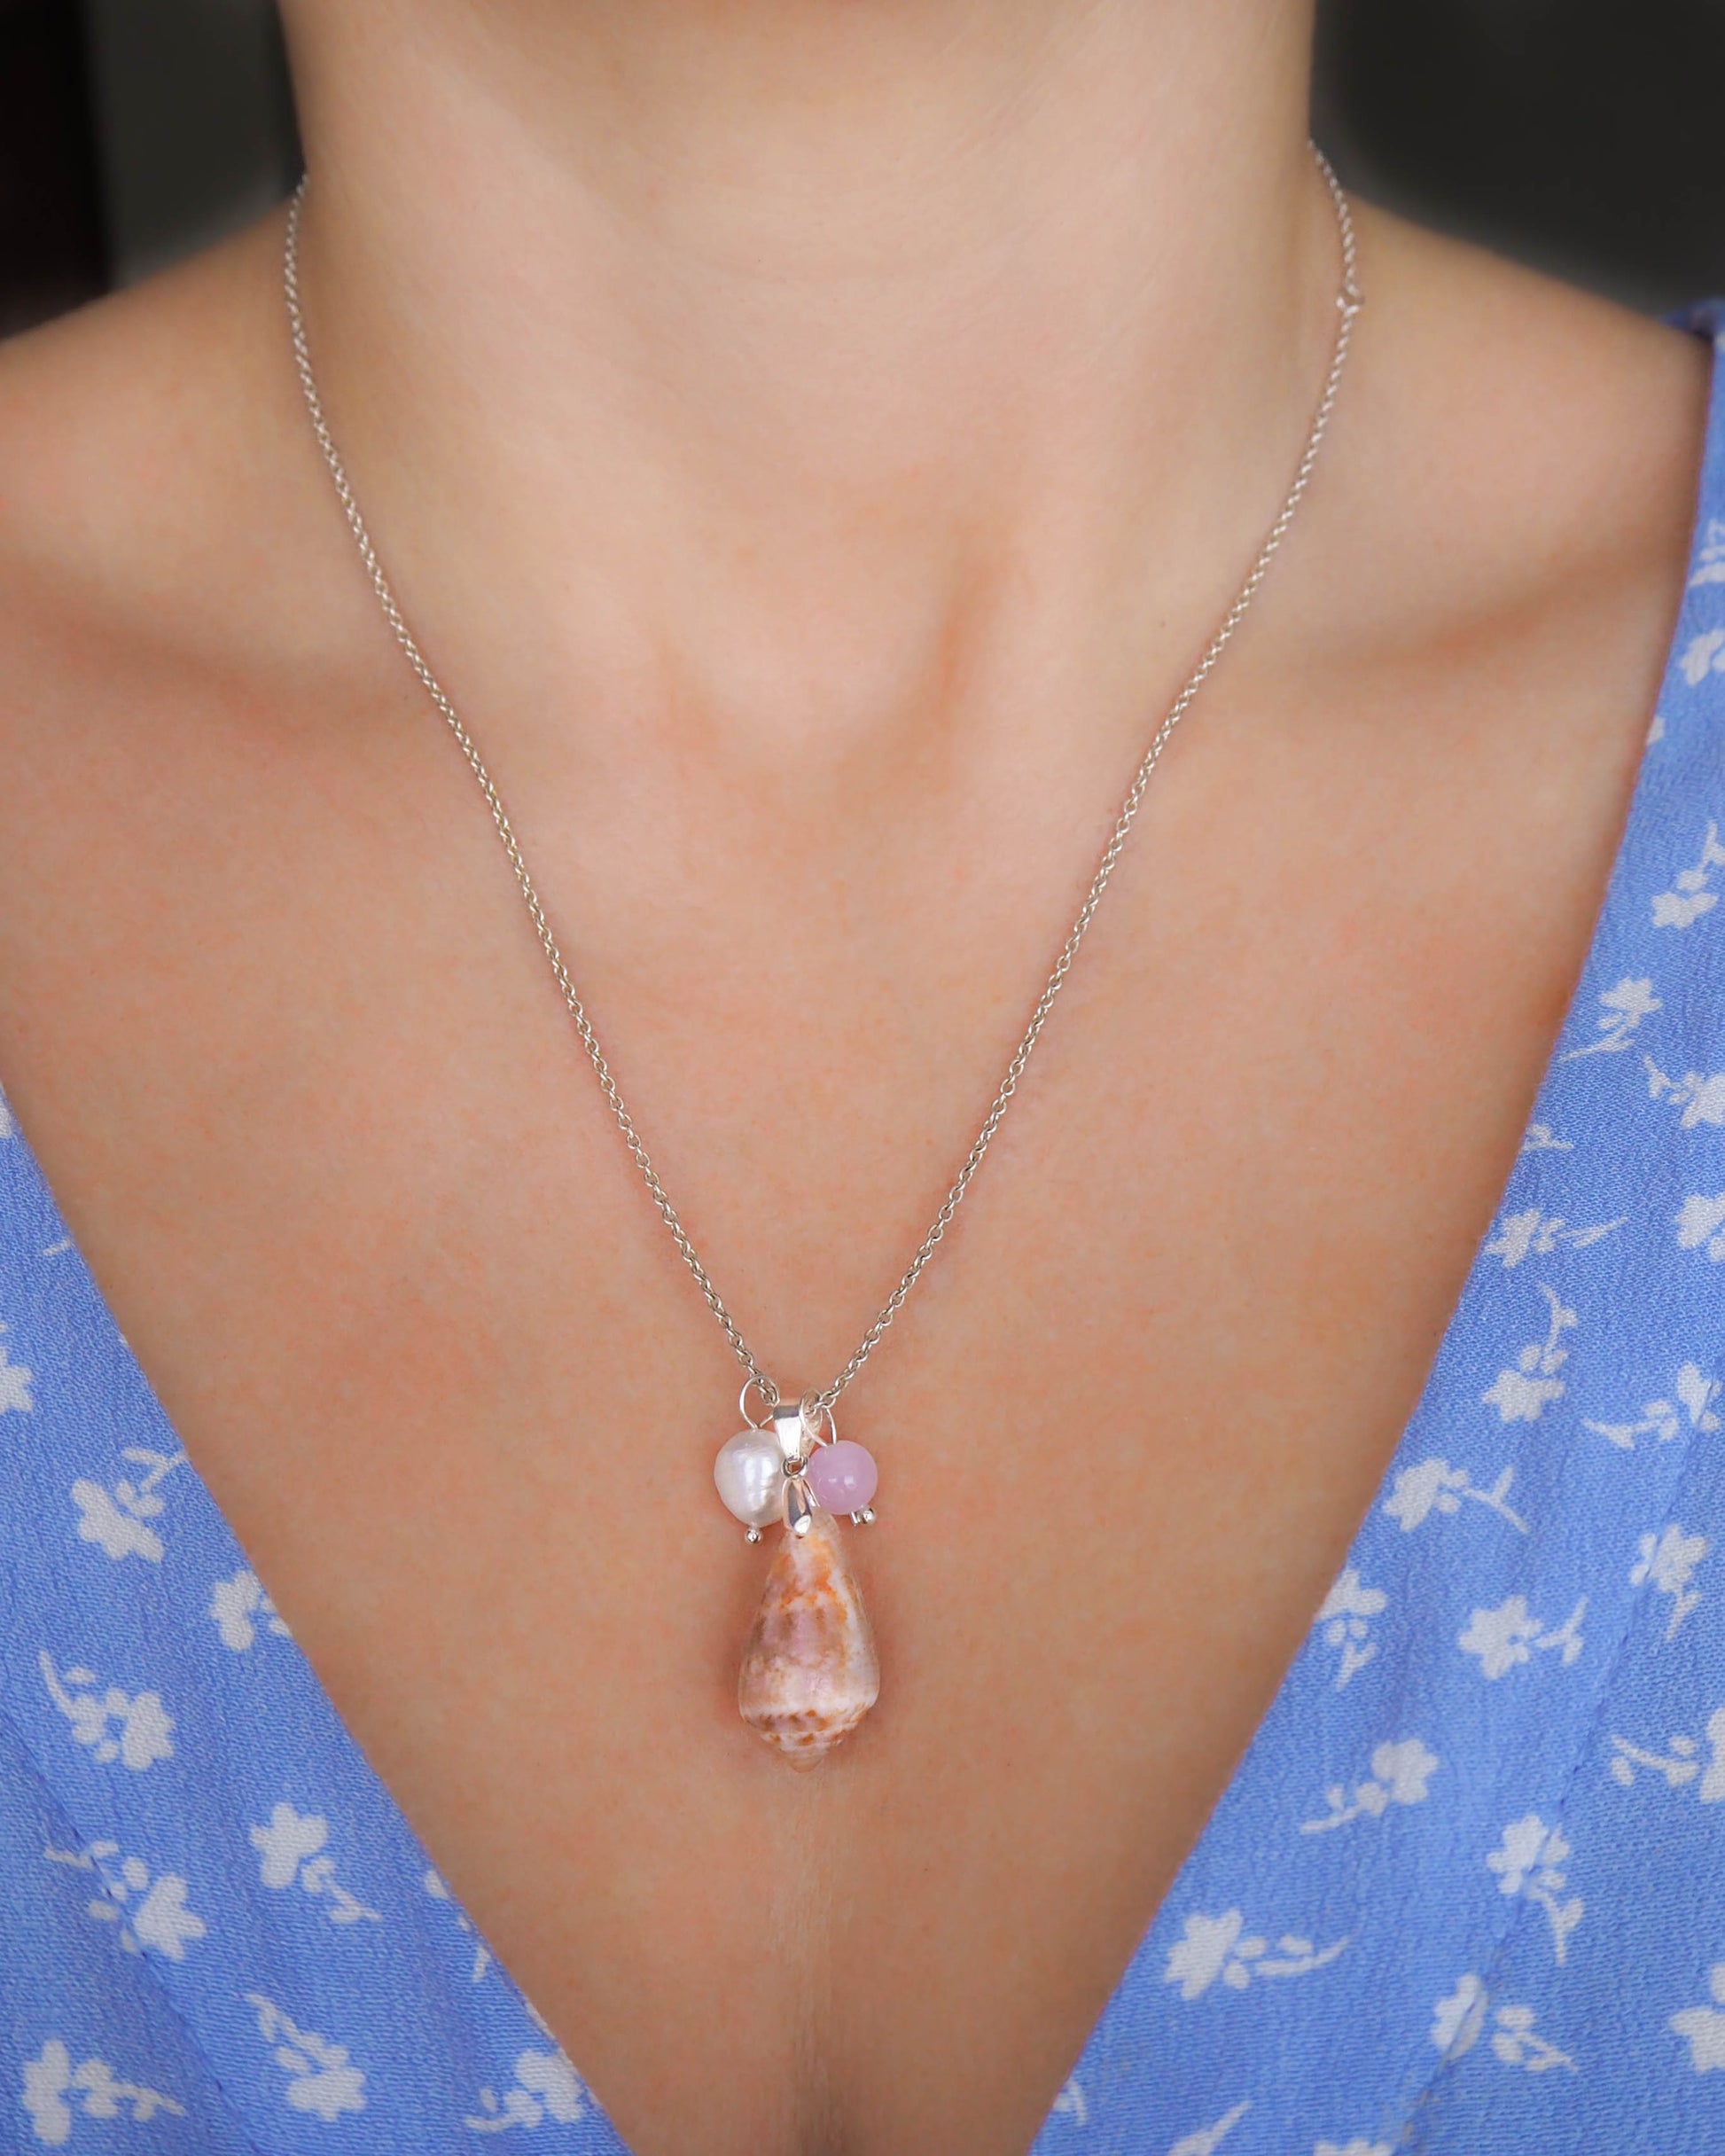 Model wearing Rose Quartz Gemstone Elegance, Captivating close-up of the Rose Quartz gemstone pendant, showcasing its soft pink tones and romantic allure in the 925 silver necklace ensemble